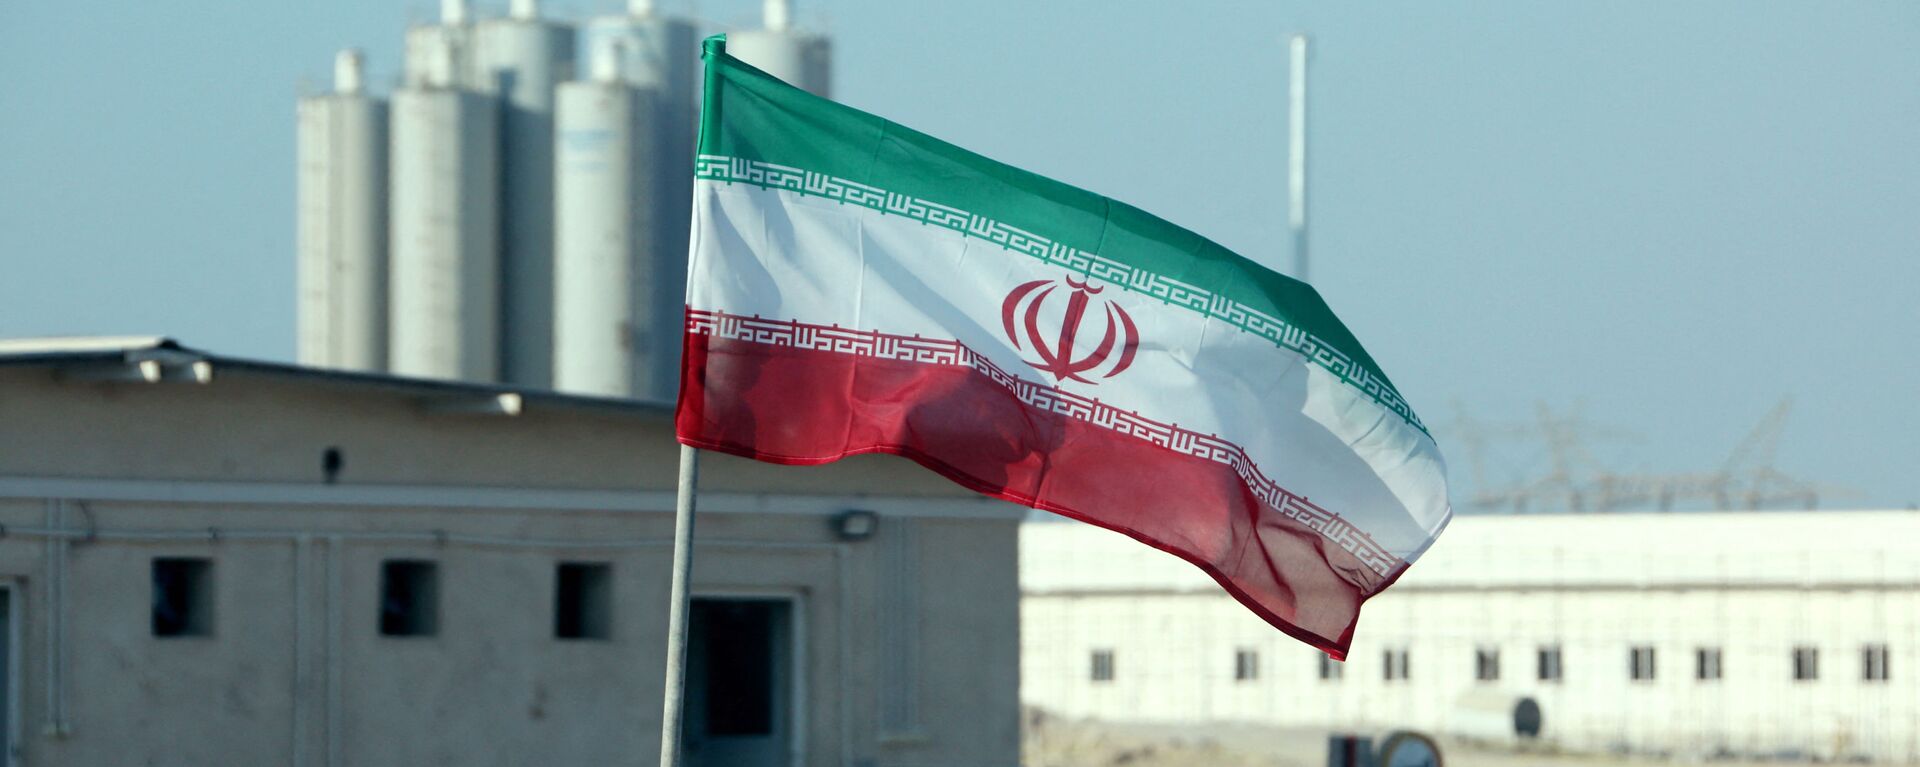 A picture taken on November 10, 2019, shows an Iranian flag in Iran's Bushehr nuclear power plant, during an official ceremony to kick-start works on a second reactor at the facility - Sputnik International, 1920, 23.06.2021